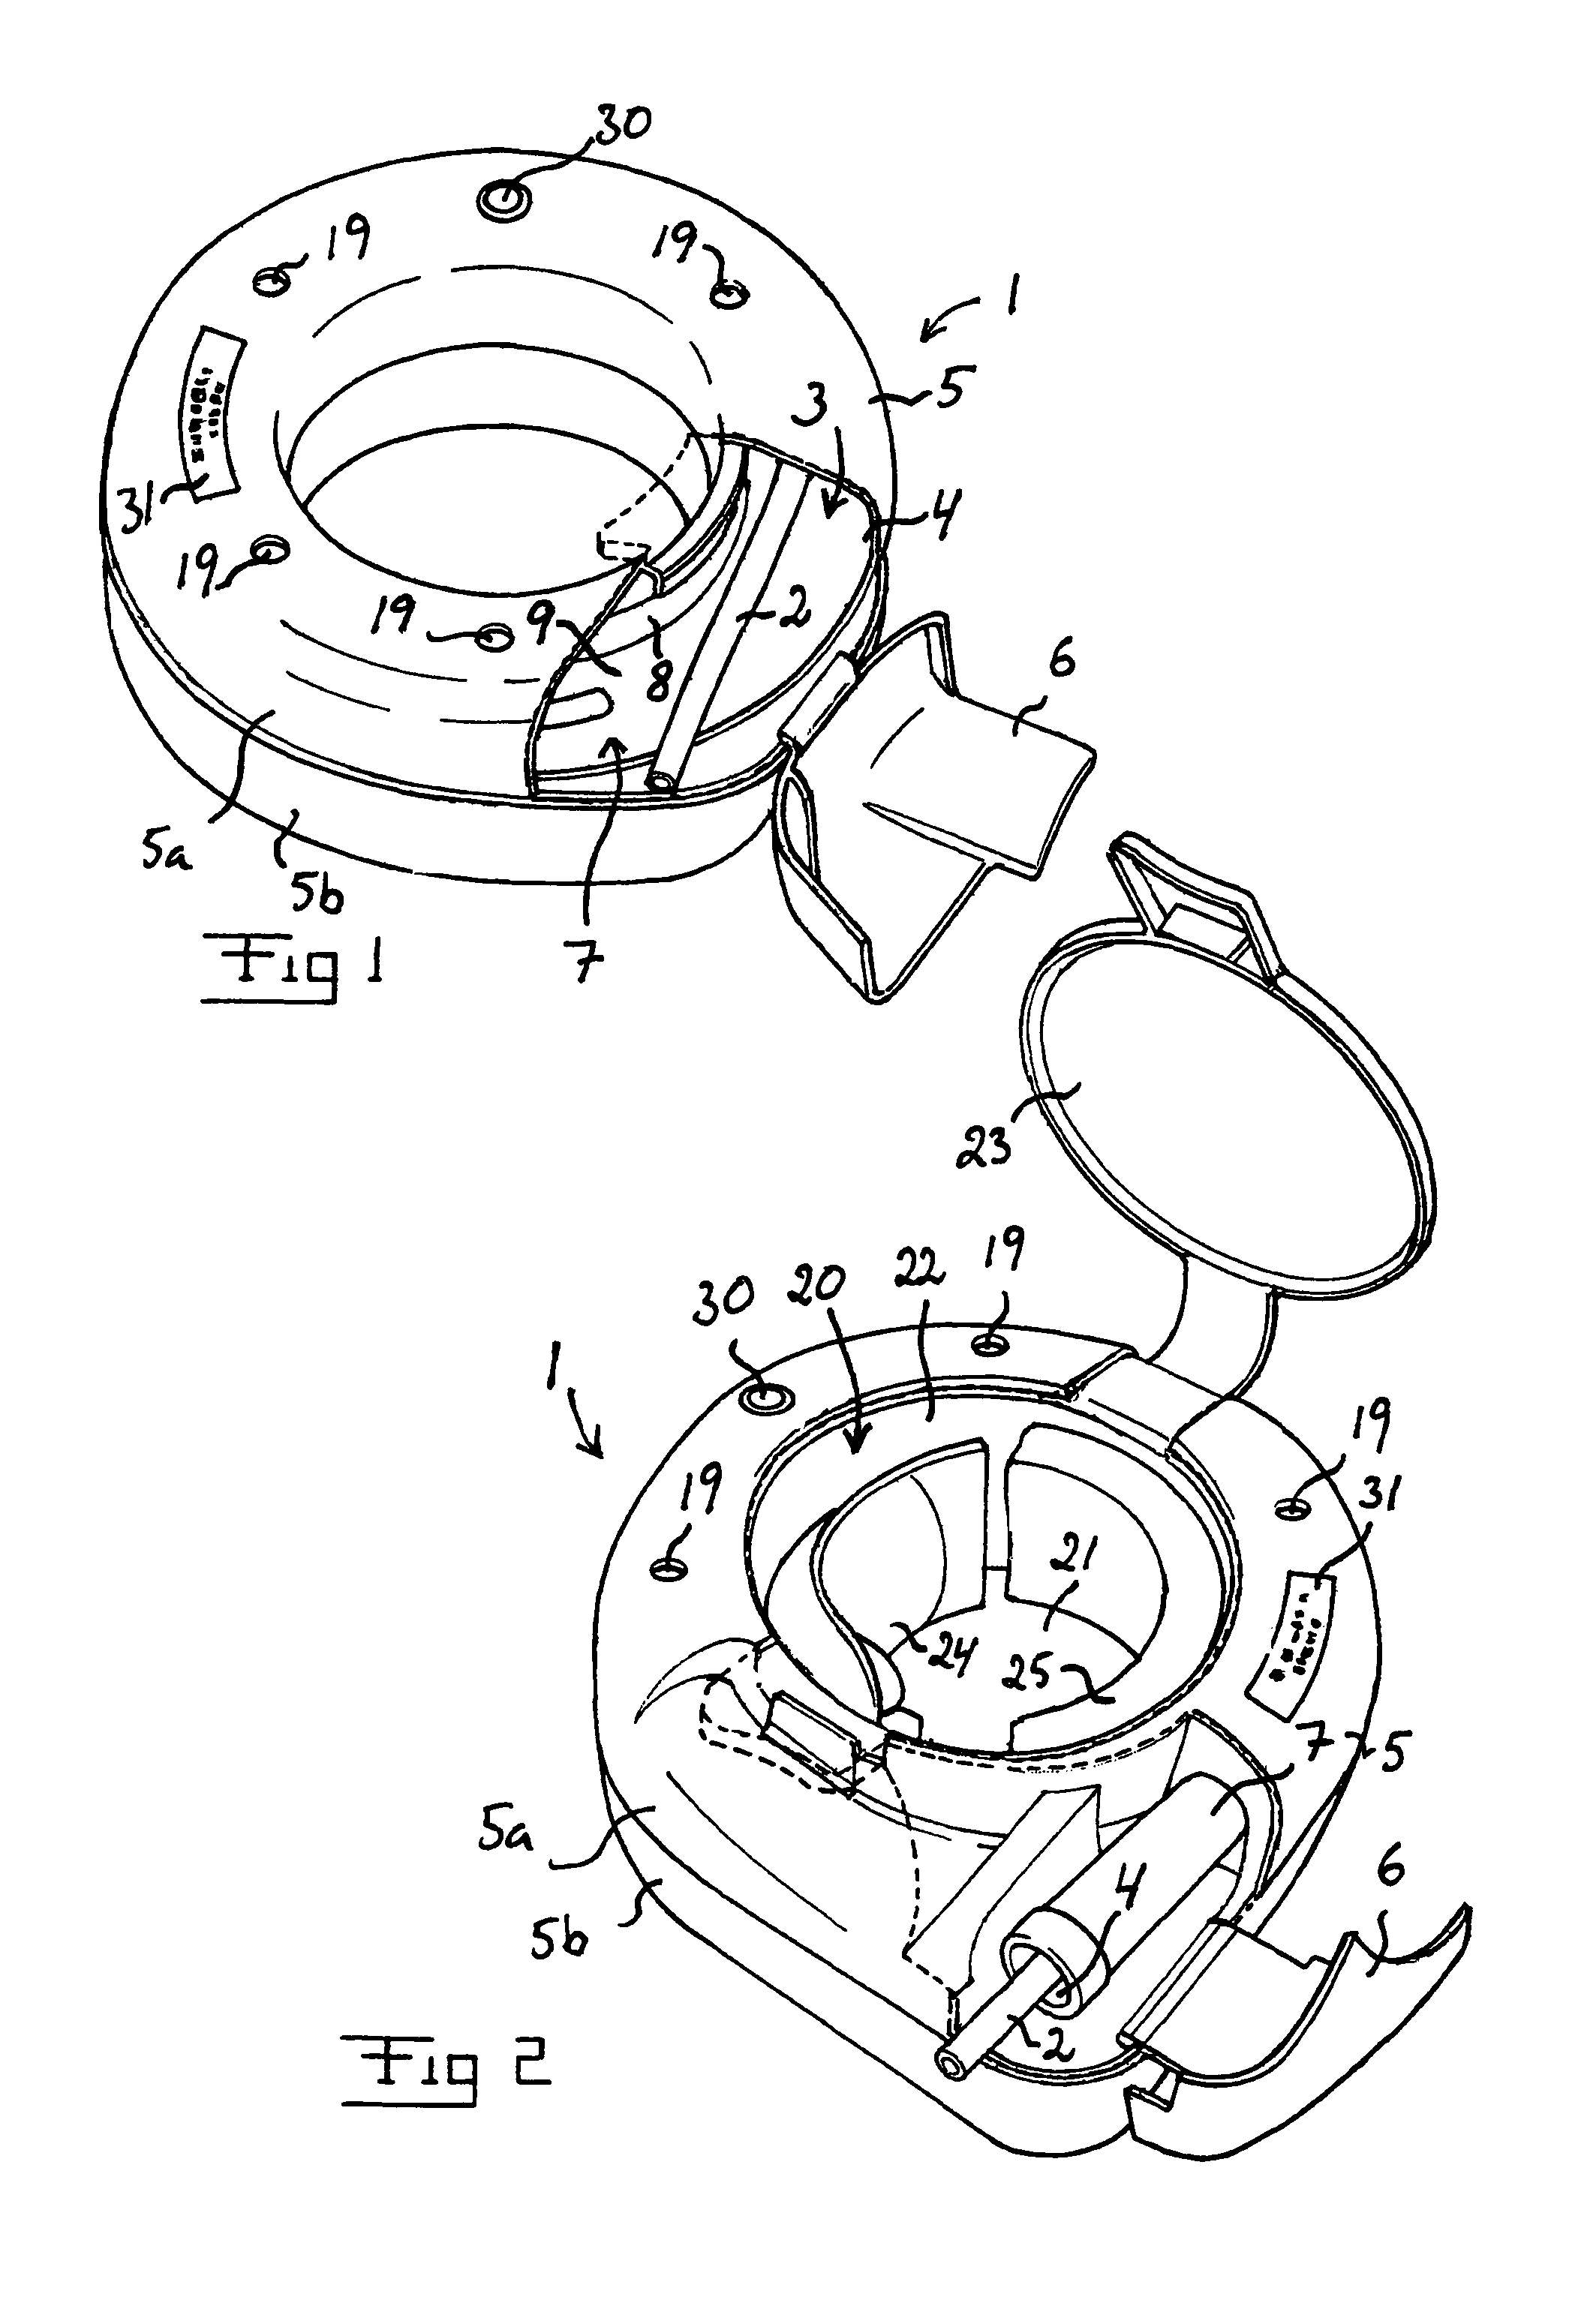 Receptacle for a catheter